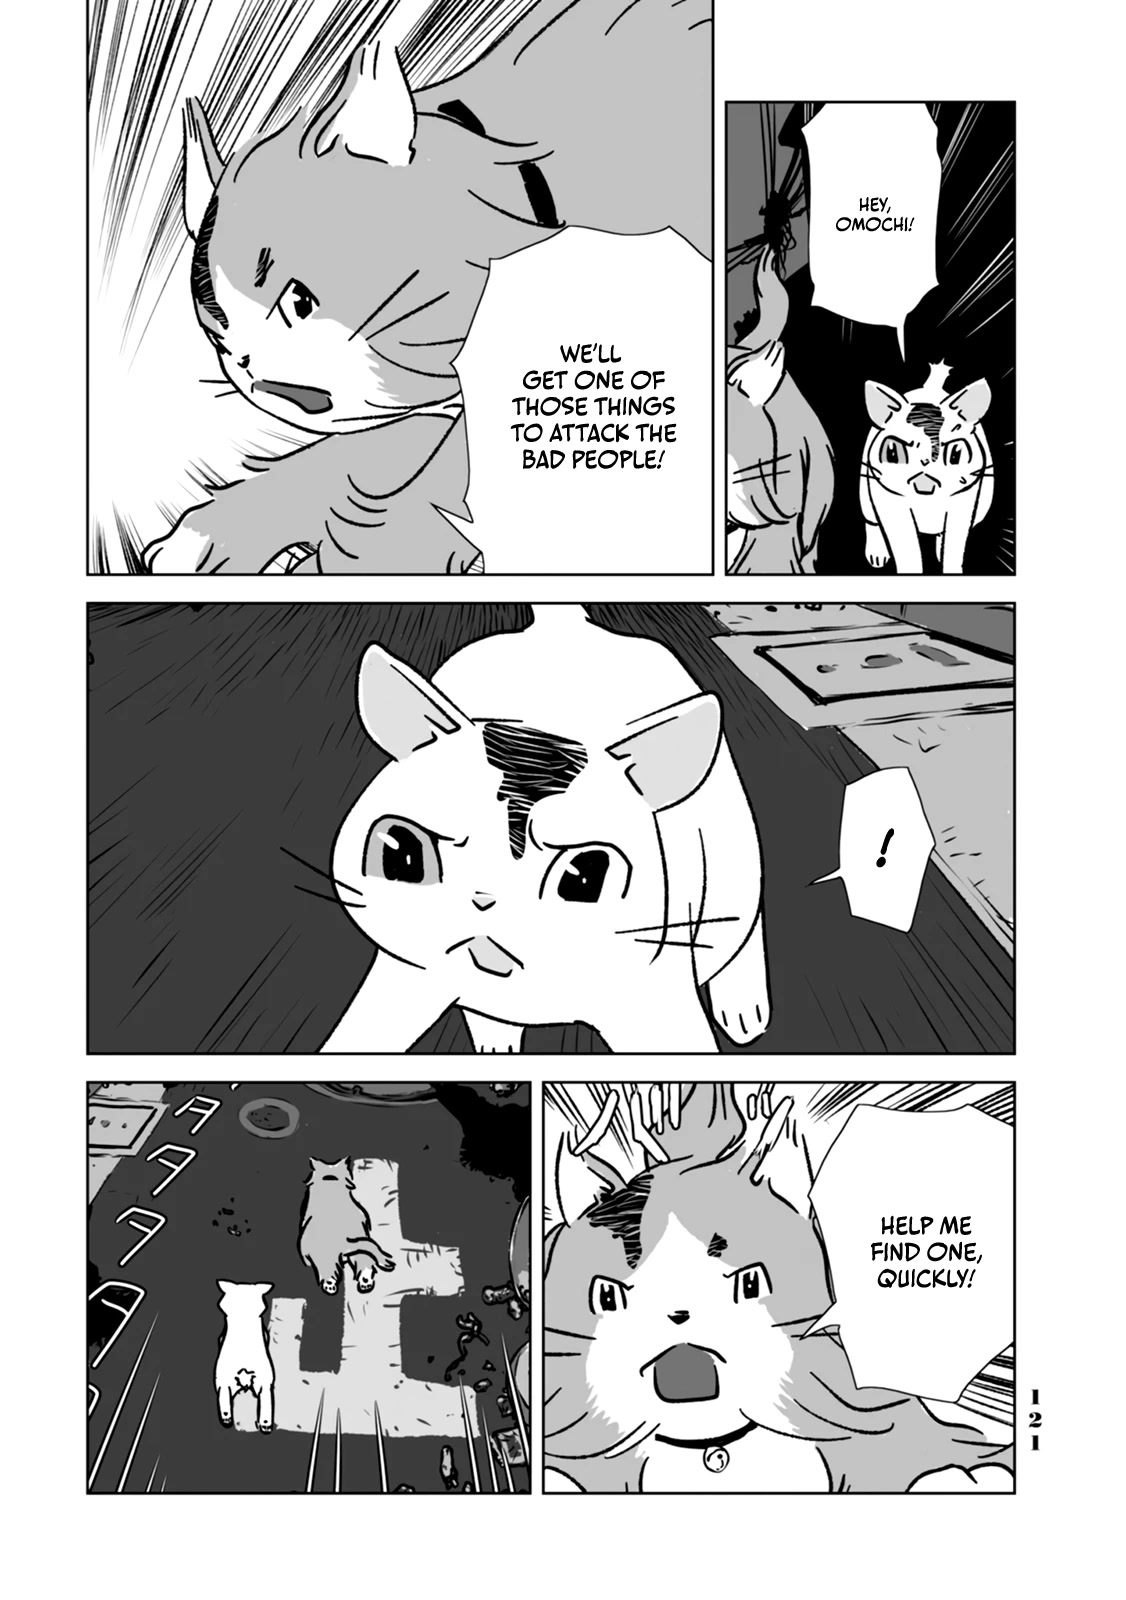 No Cats Were Harmed In This Comic. - Page 3